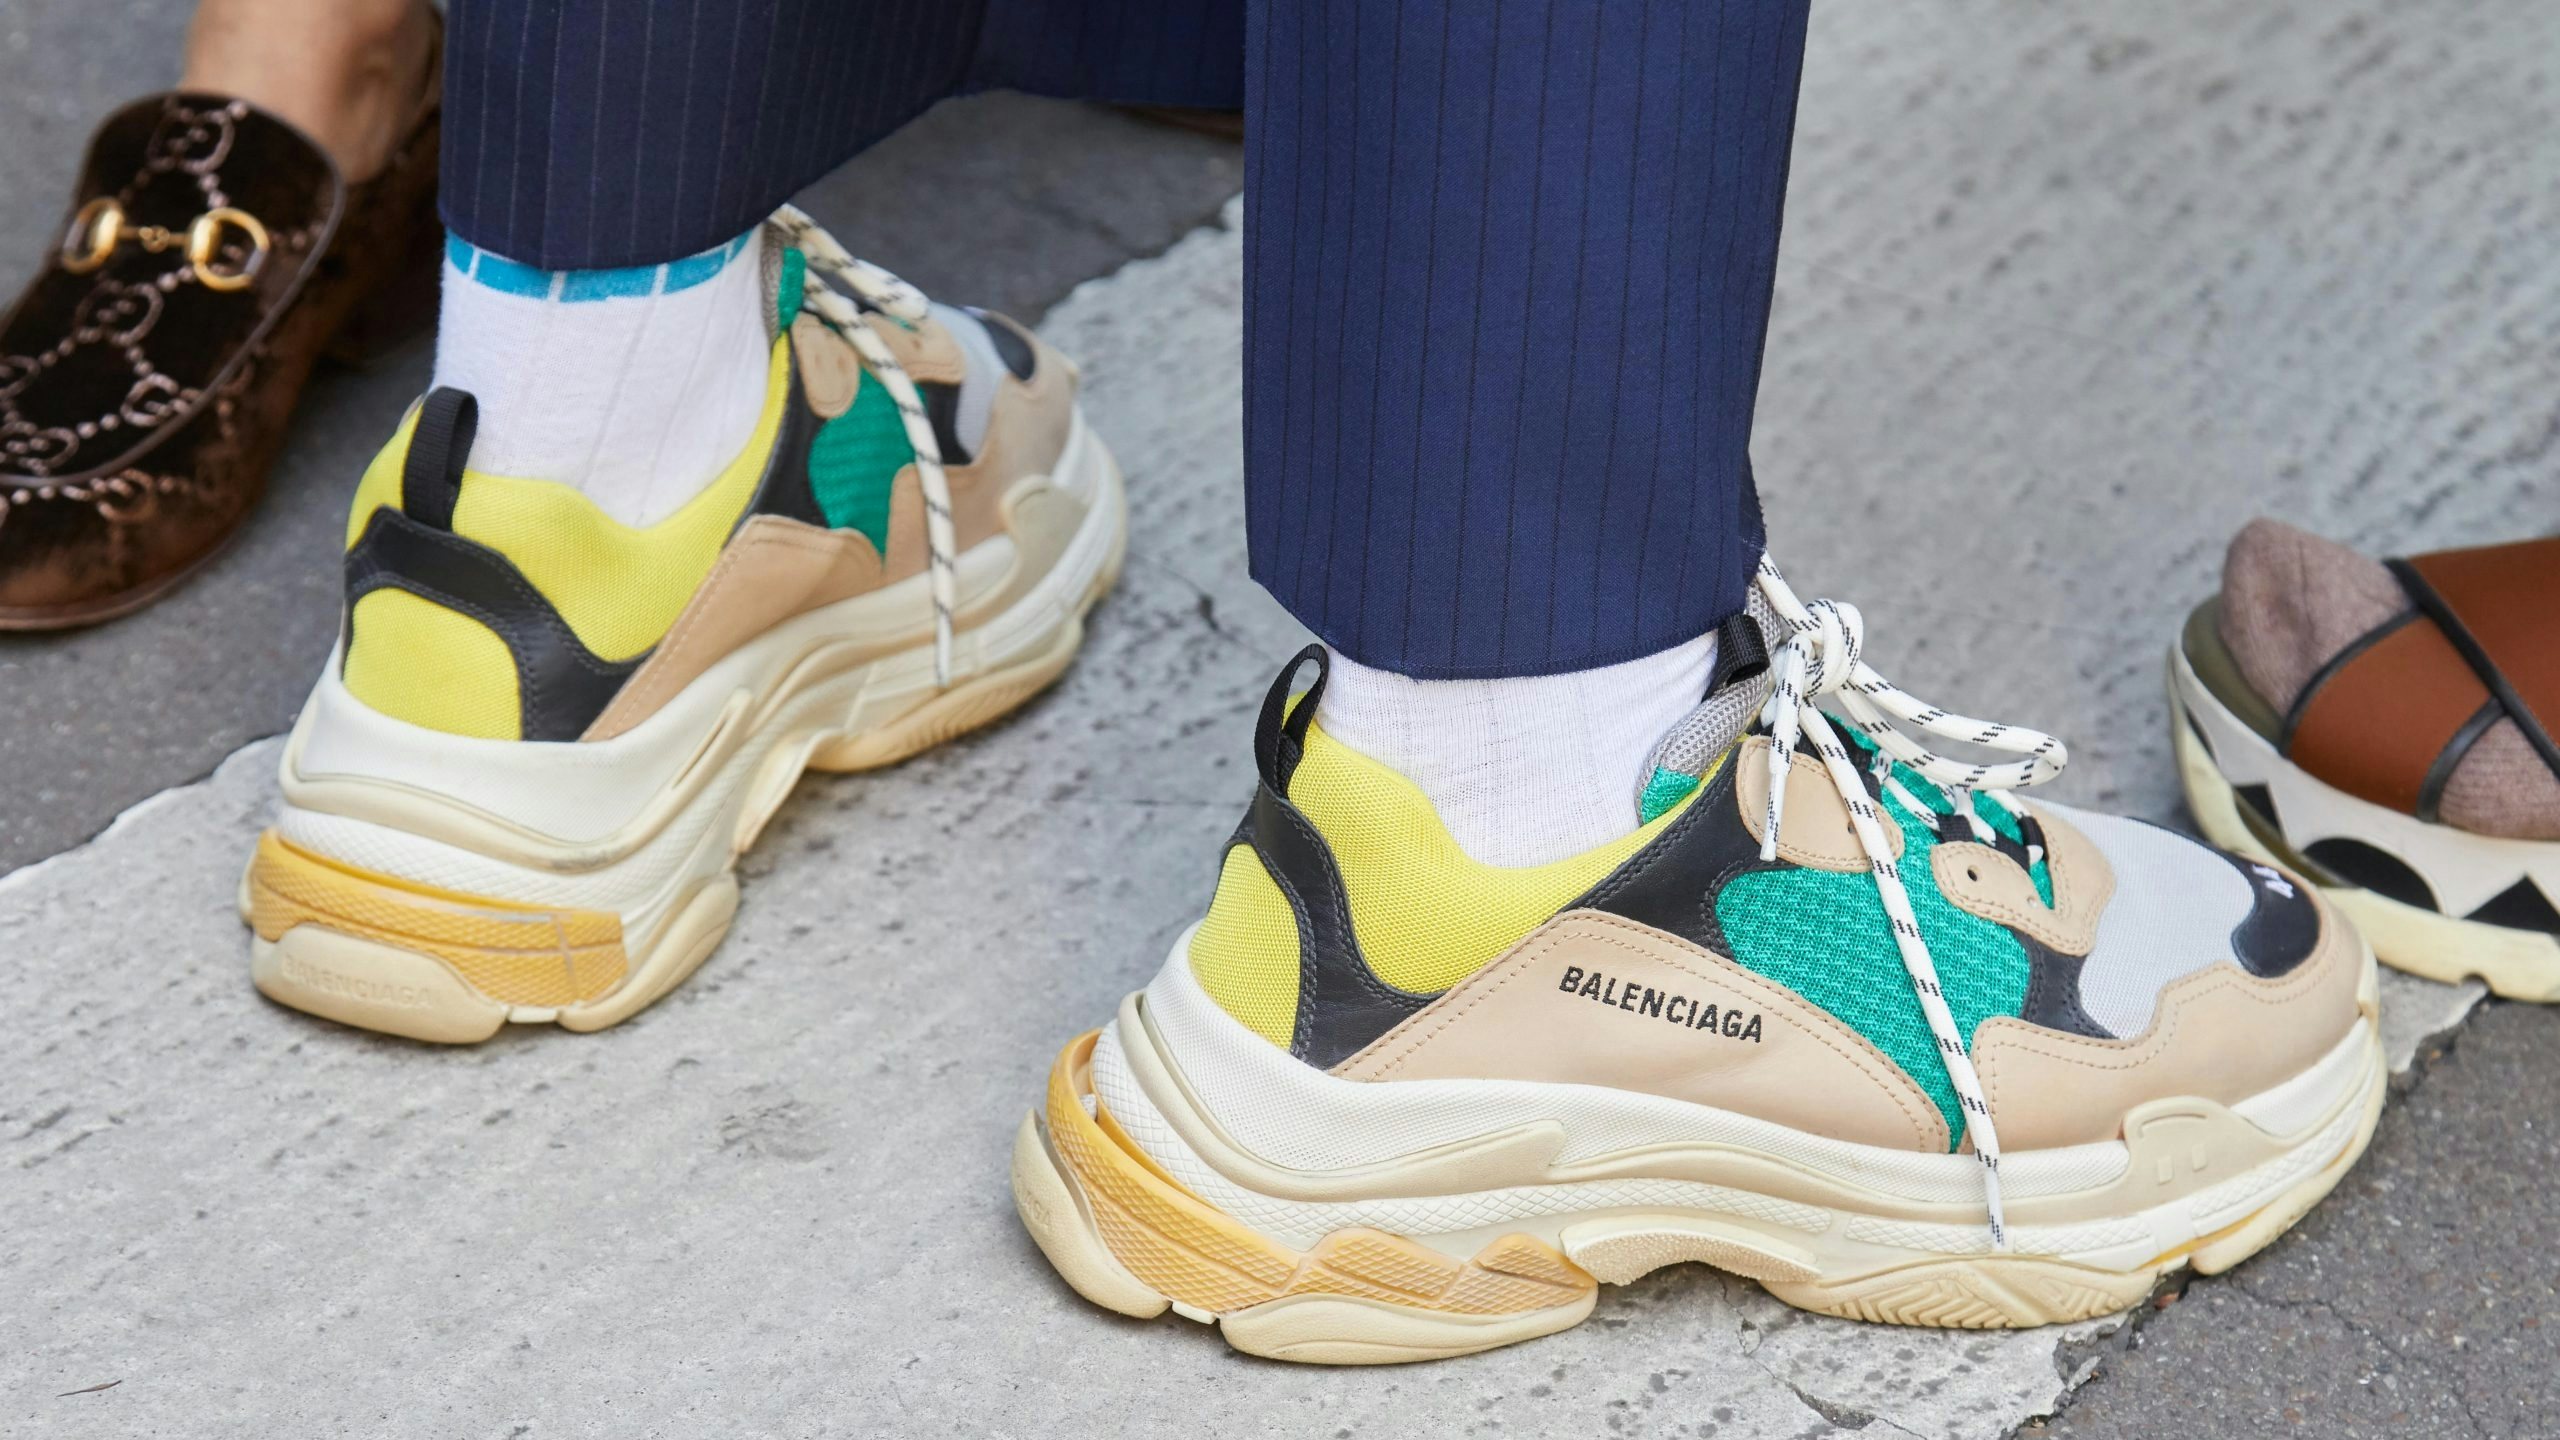 C-suite executives are ditching their dress shoes for luxury sneakers. What does this new social currency say about the future of fashion? Photo: Shutterstock